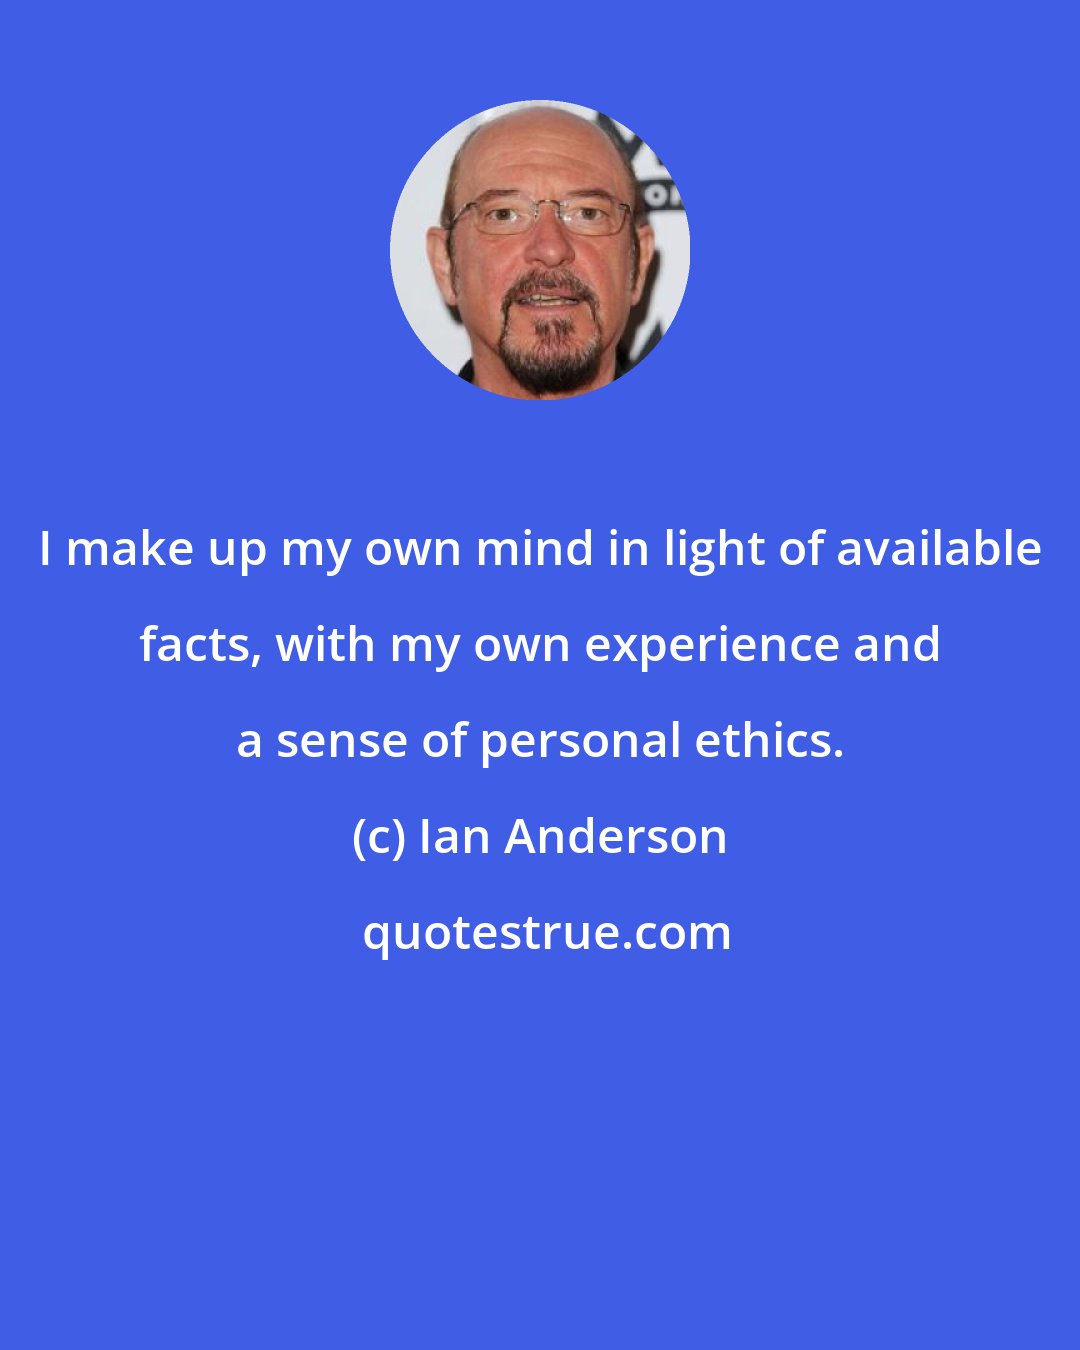 Ian Anderson: I make up my own mind in light of available facts, with my own experience and a sense of personal ethics.